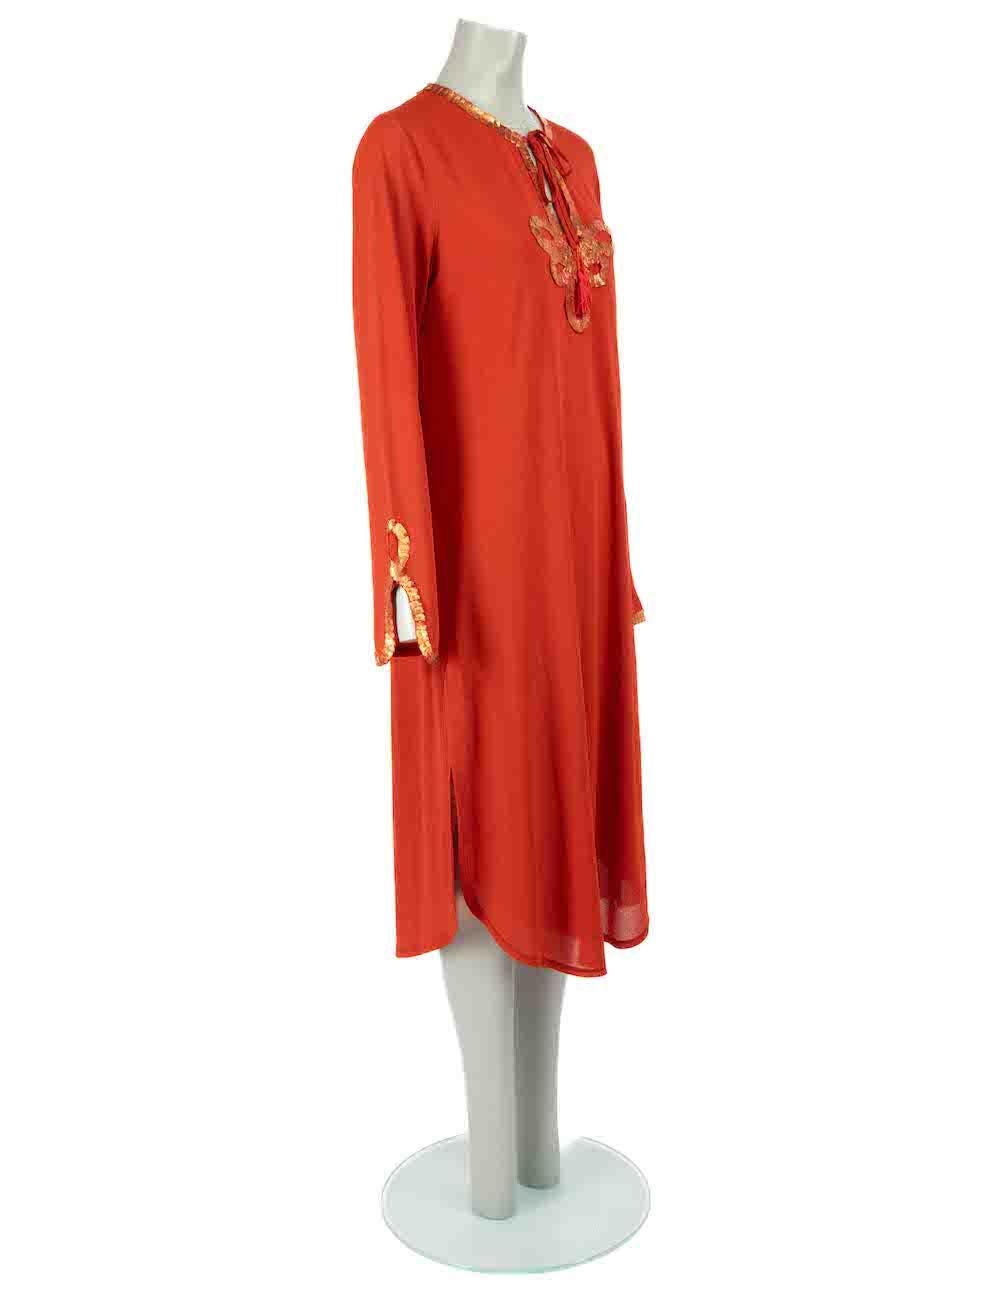 CONDITION is Very good. Minimal wear to dress is evident. Minimal wear to the front with light marks to the fabric on this used Jean Paul Gaultier Soleil designer resale item.
  
Details
Burnt orange
Polyester
Beach dress
Metallic trim detail
Neck